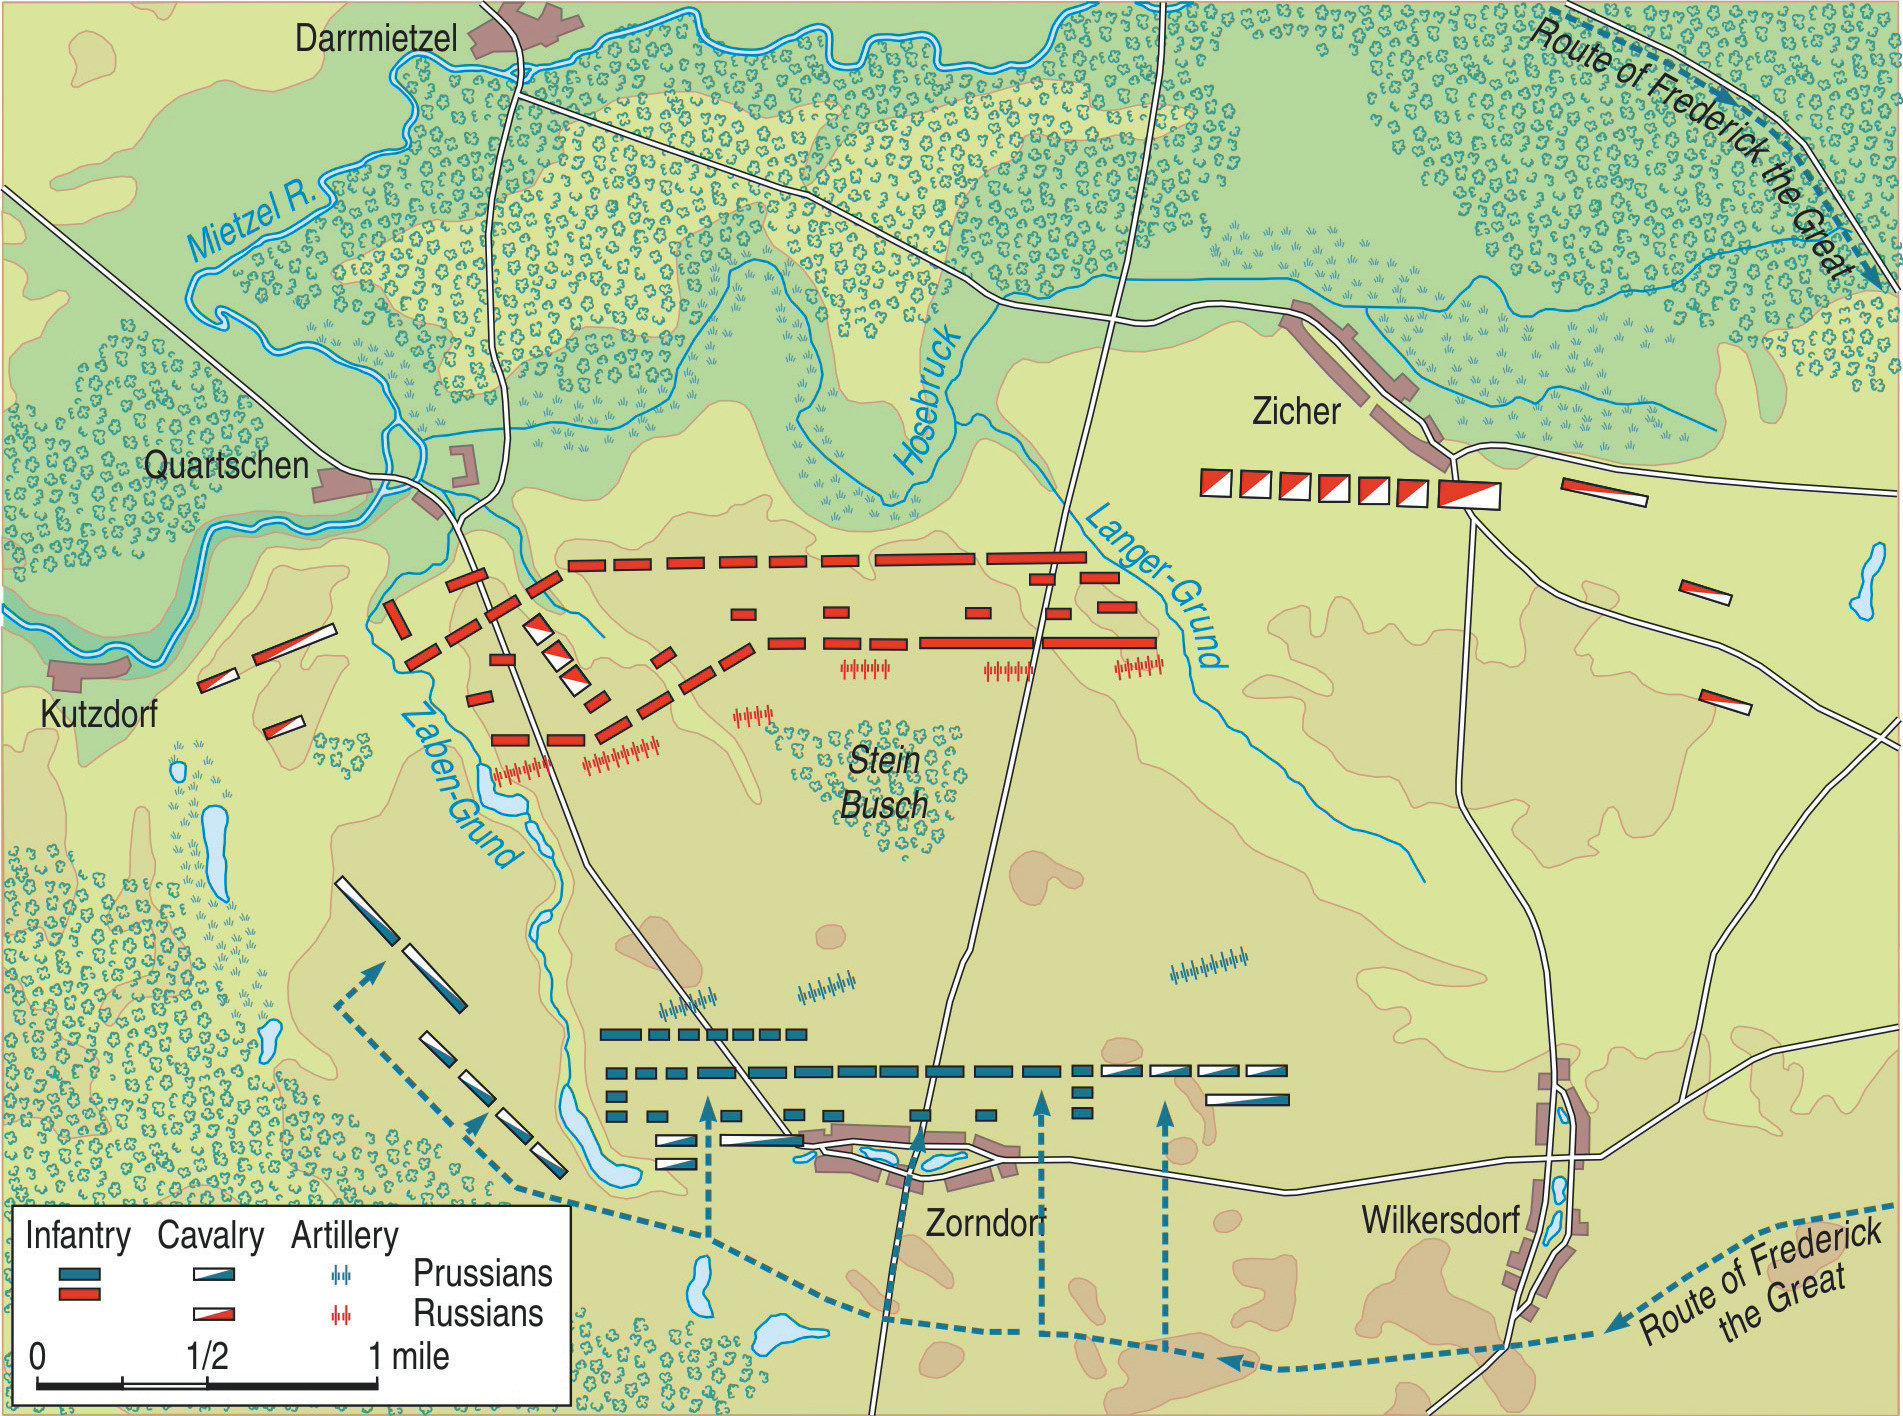 Hemmed in by the Meitzel River at its back, the Russian Army had no way to retreat if the battle went badly. Meanwhile, the Prussians mounted an attack on the Russian right.